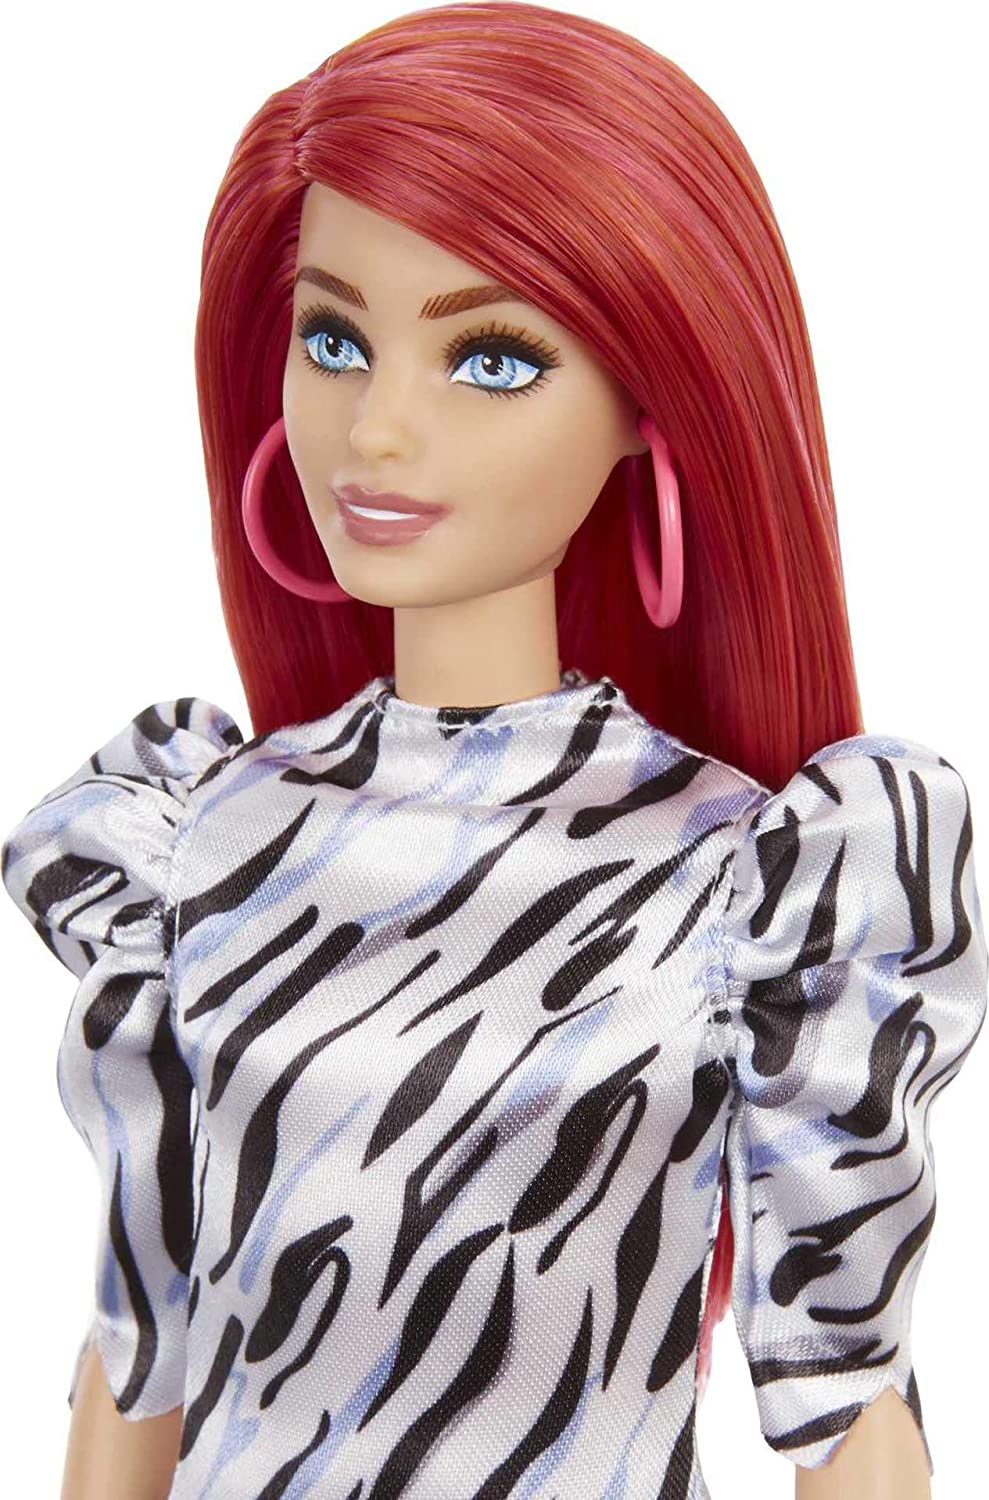 Barbie Fashionistas Doll #168 with Short Red Hair, Toy for Kids 3 to 8 Years Old